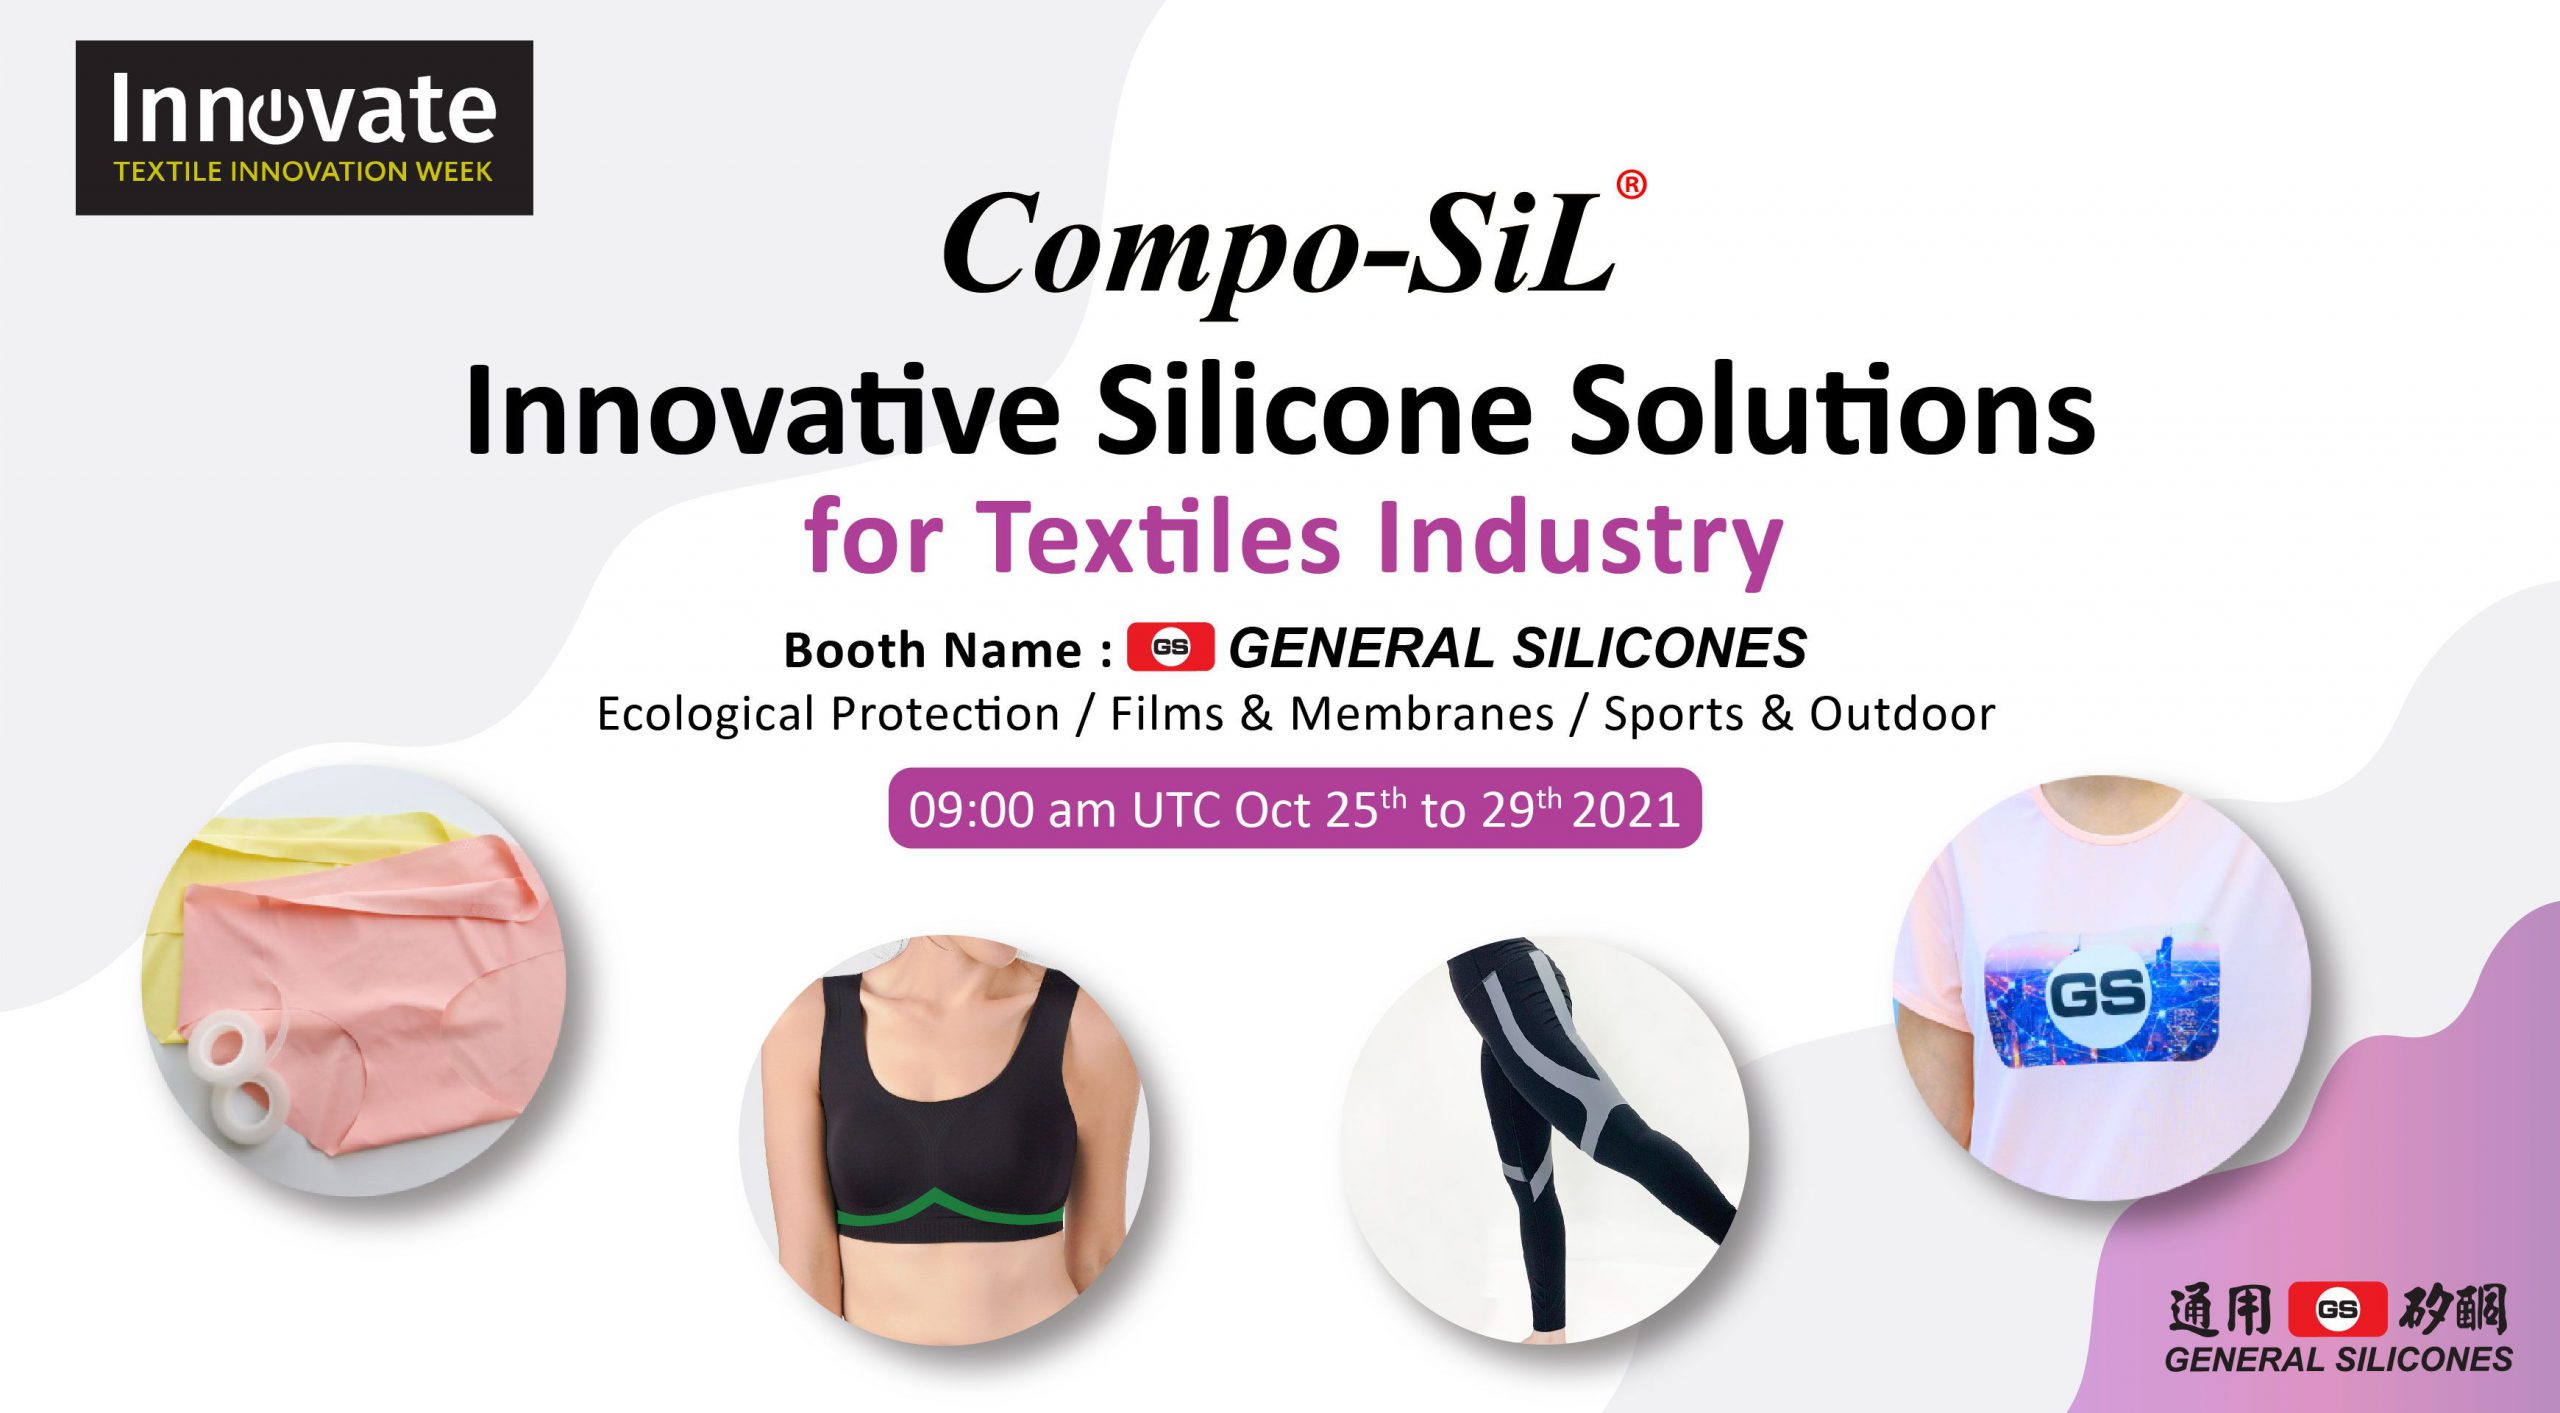 5 Key Breakthroughs Developed by Compo-SiL® at WTiN's Innovate Textile Innovation Week 2021